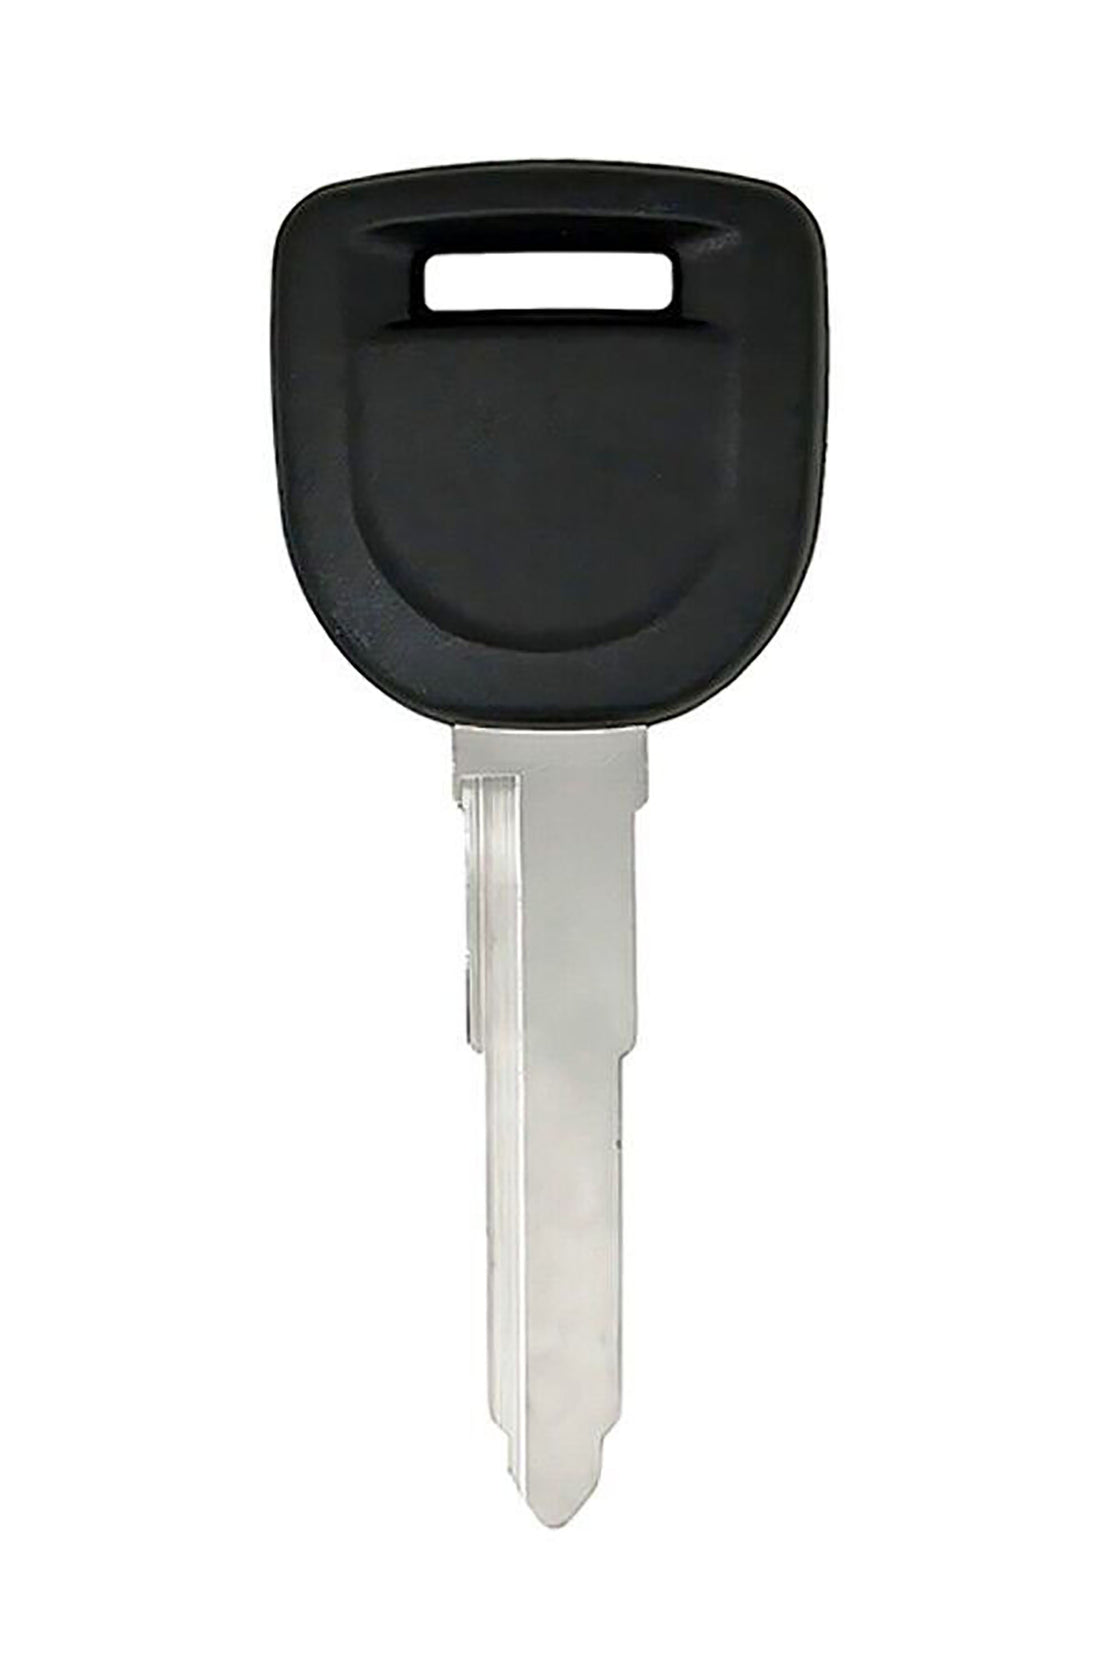 1x New Replacement Transponder Key Compatible with & Fit For Mazda Vehicles 4D63 (80BIT) - MPN F1Y1-76-2GX-03